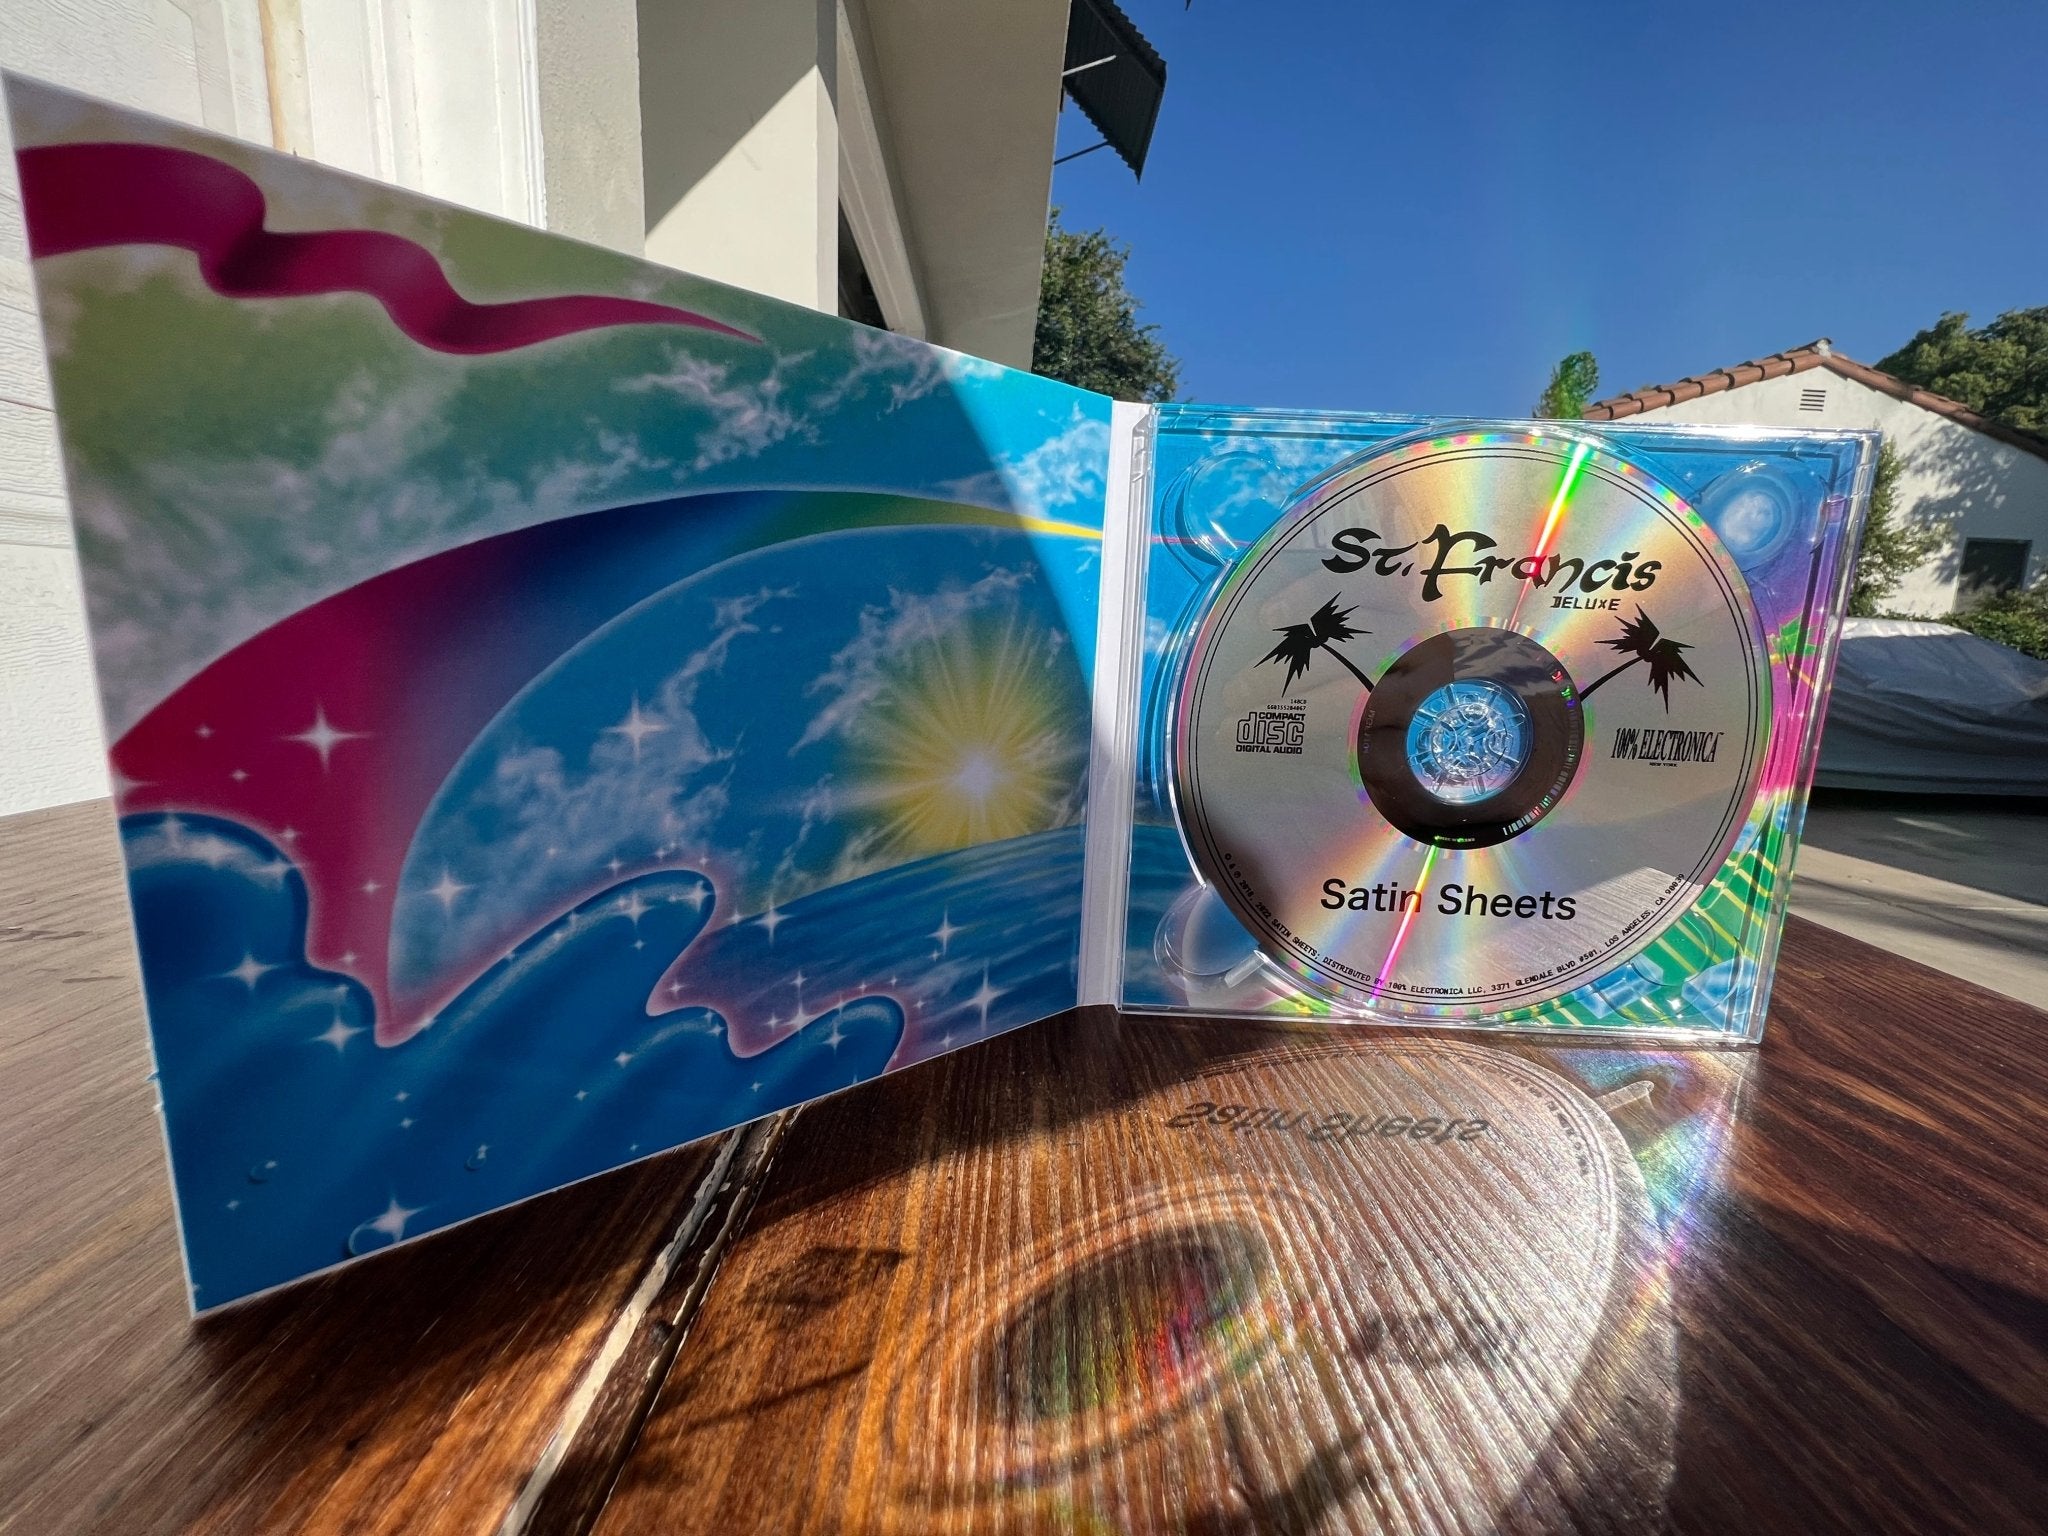 Satin Sheets - St. Francis Deluxe CD (St. Francis I + II) - 100% Electronica Official Store (Photo 6)